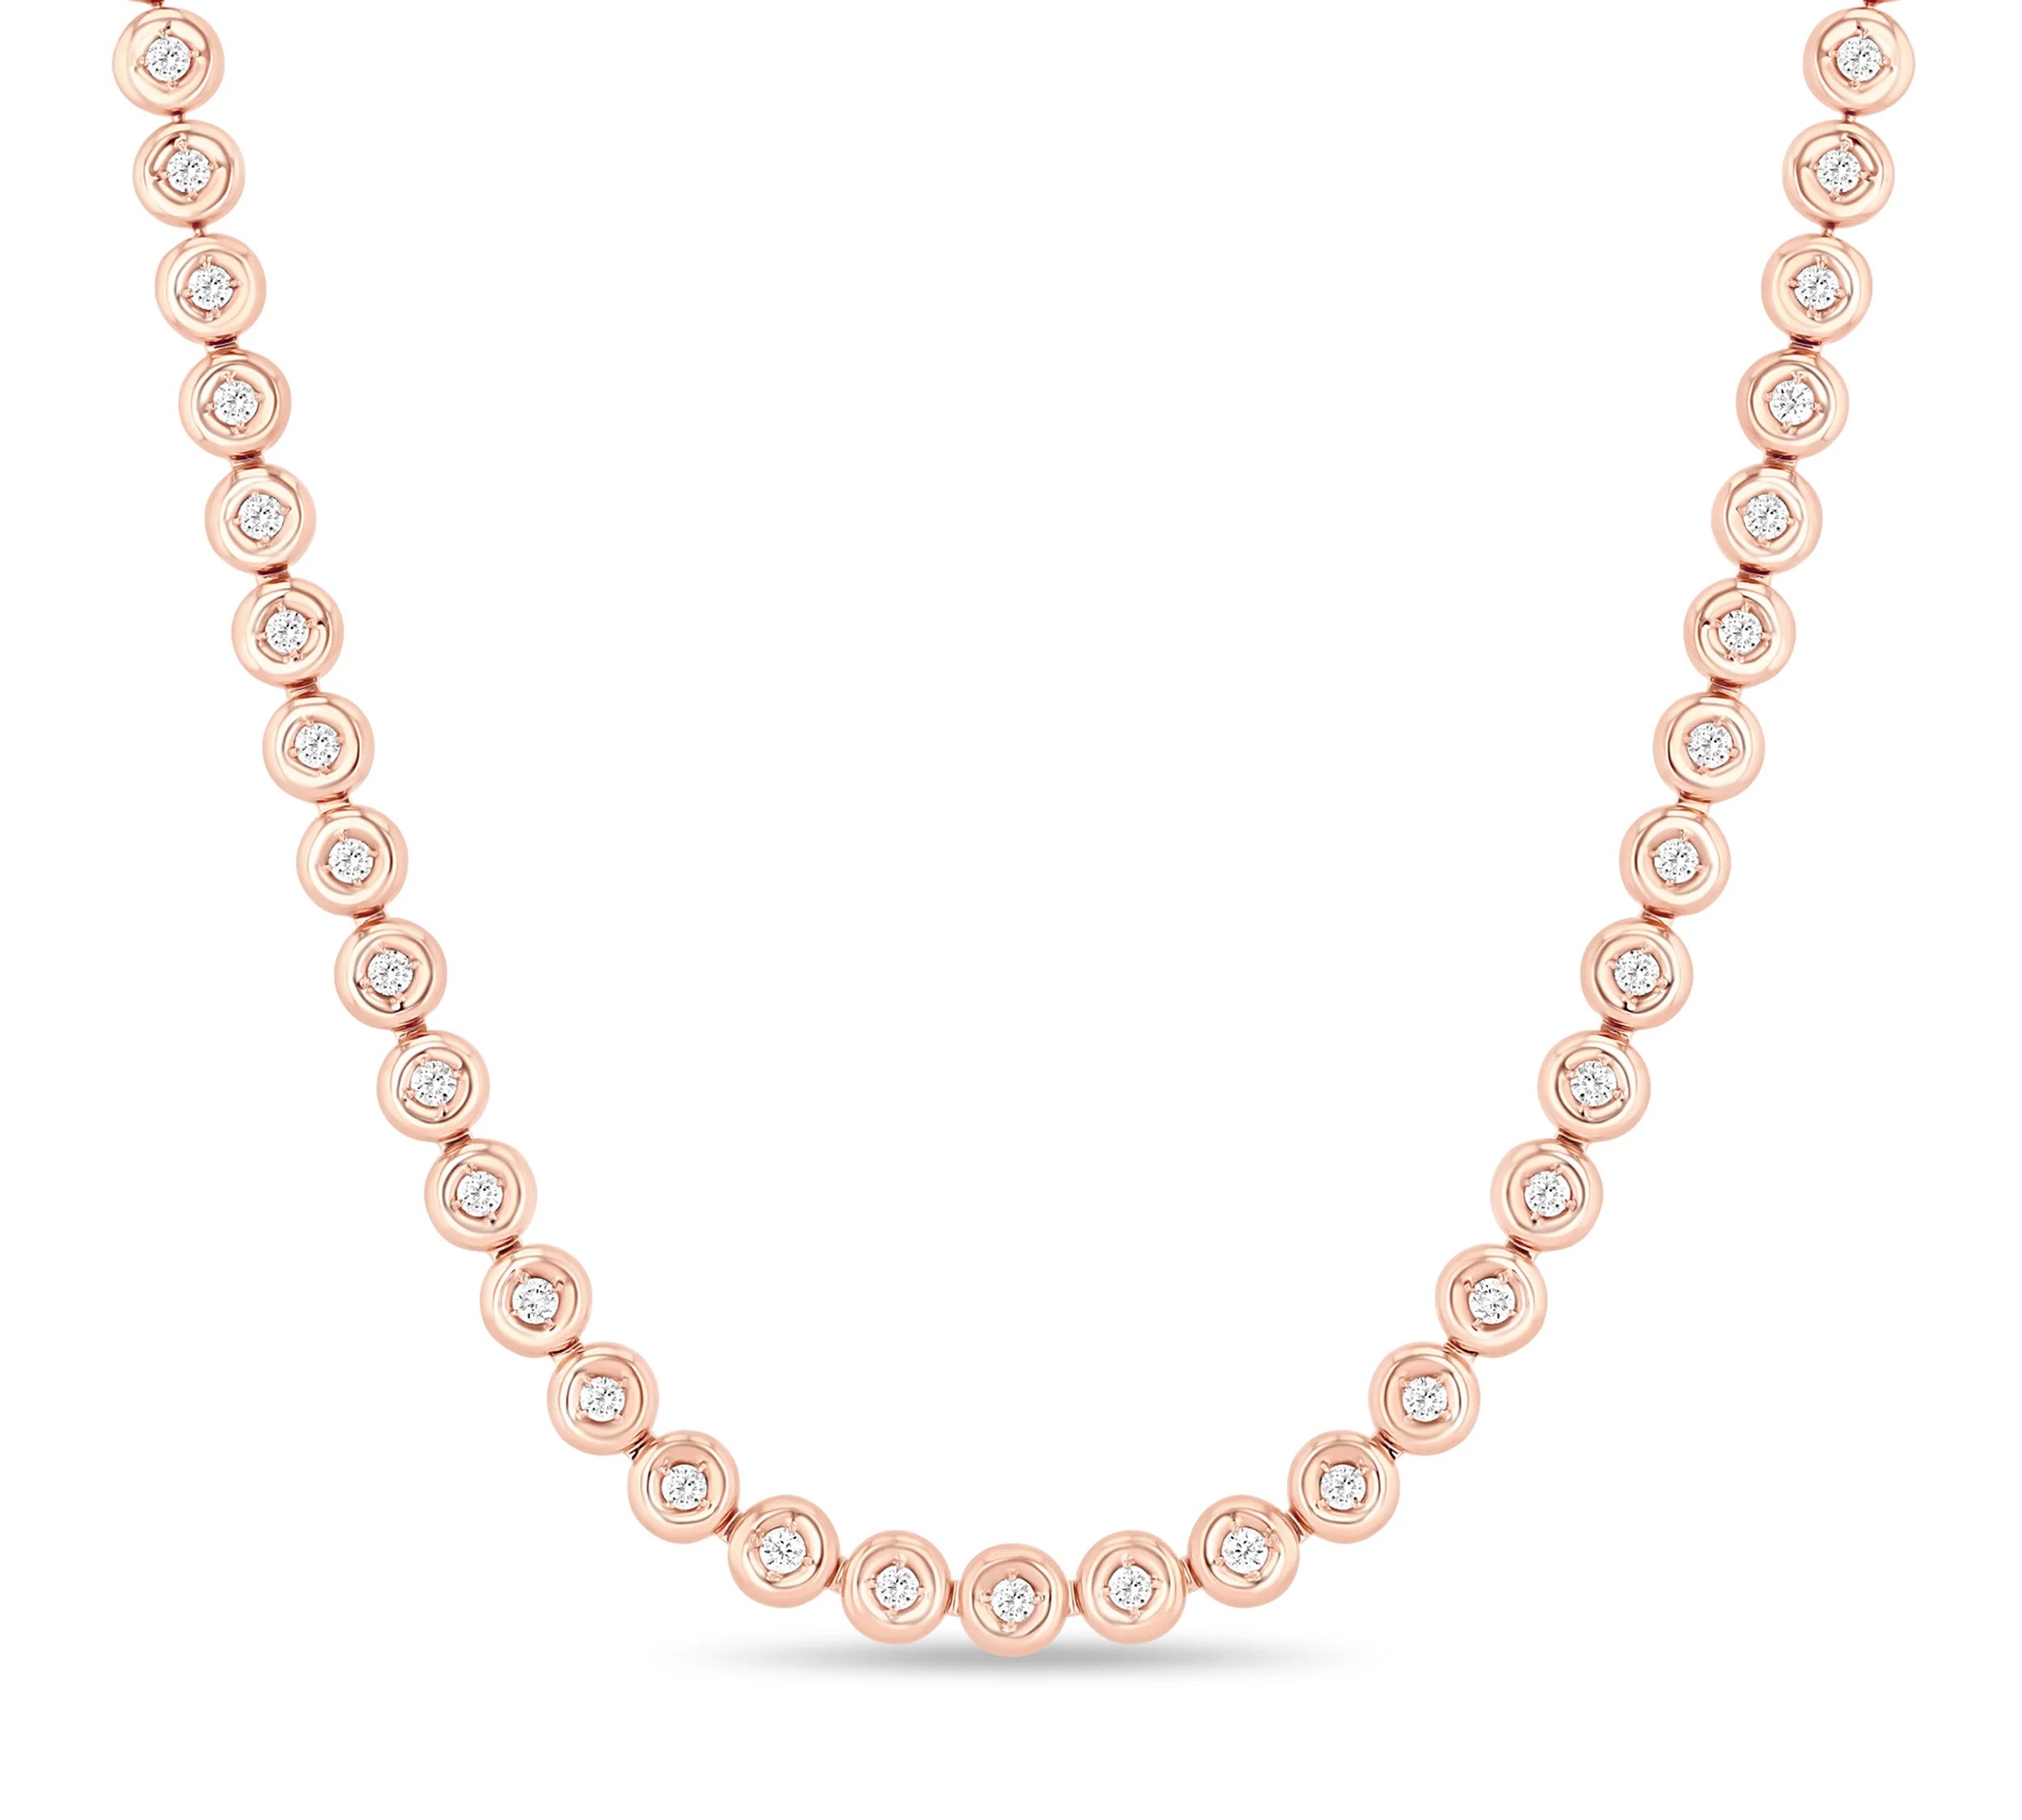 Orb Tennis Necklace Tennis Carbon and Hyde Rose Gold  